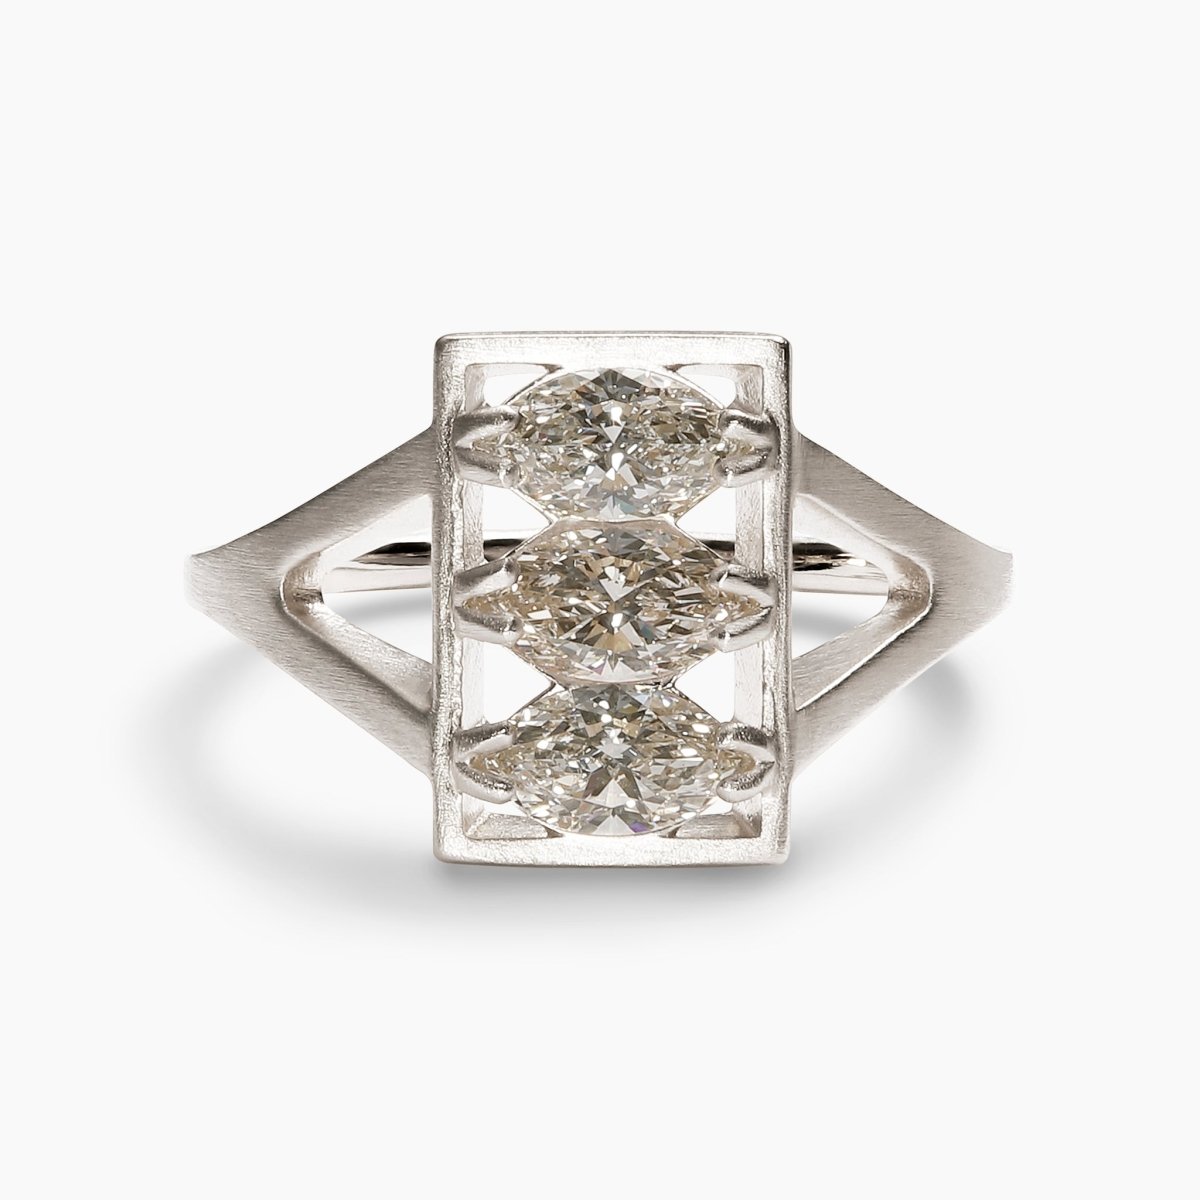 Rectangular Claro ring, featuring marquise lab-grown diamonds set in 14K white gold. Designed and handcrafted in Portland, Oregon.